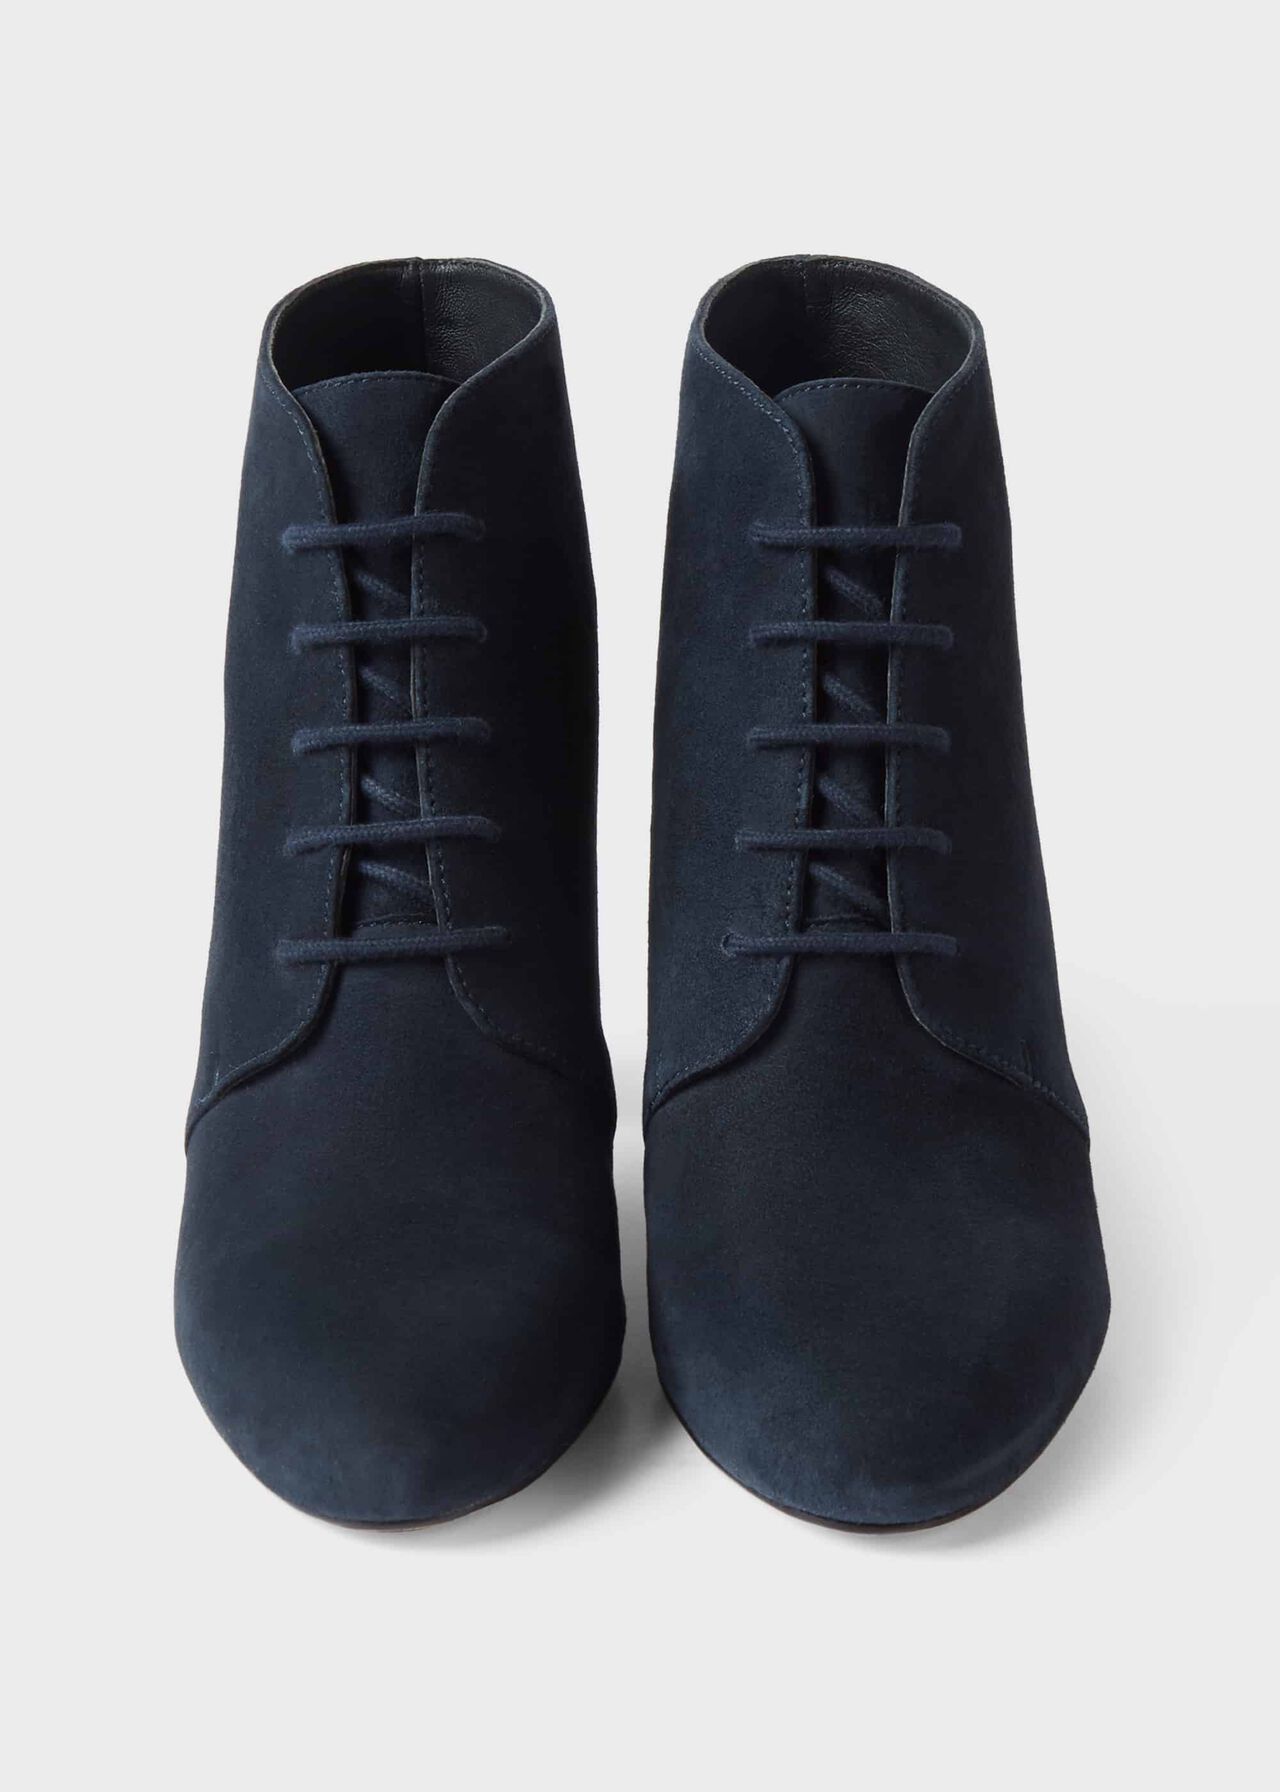 Patricia Suede Ankle Boots, Navy, hi-res